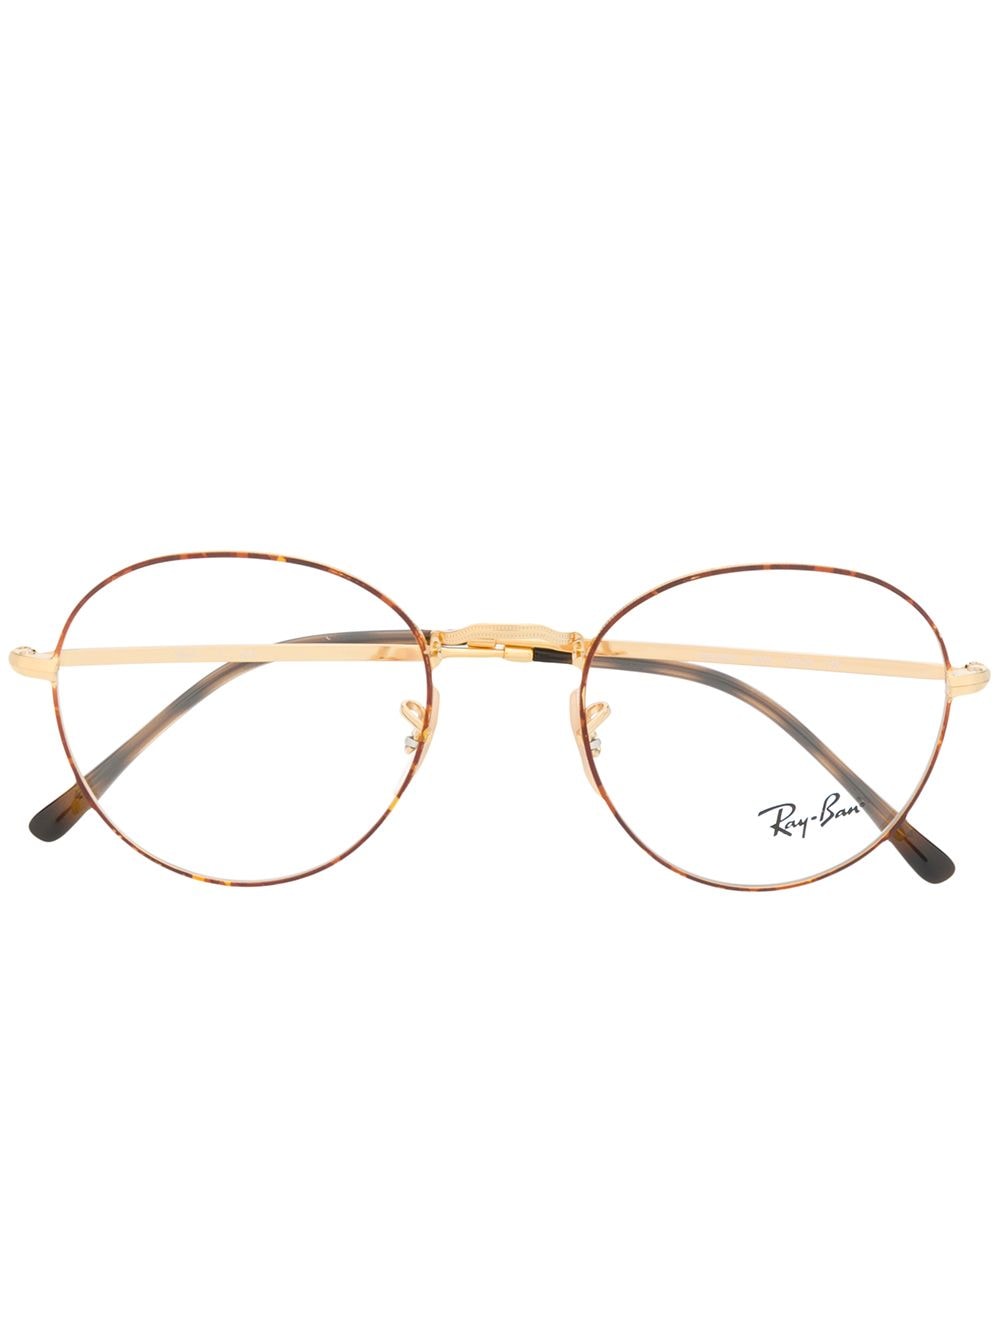 Ray-Ban round framed glasses - Gold von Ray-Ban